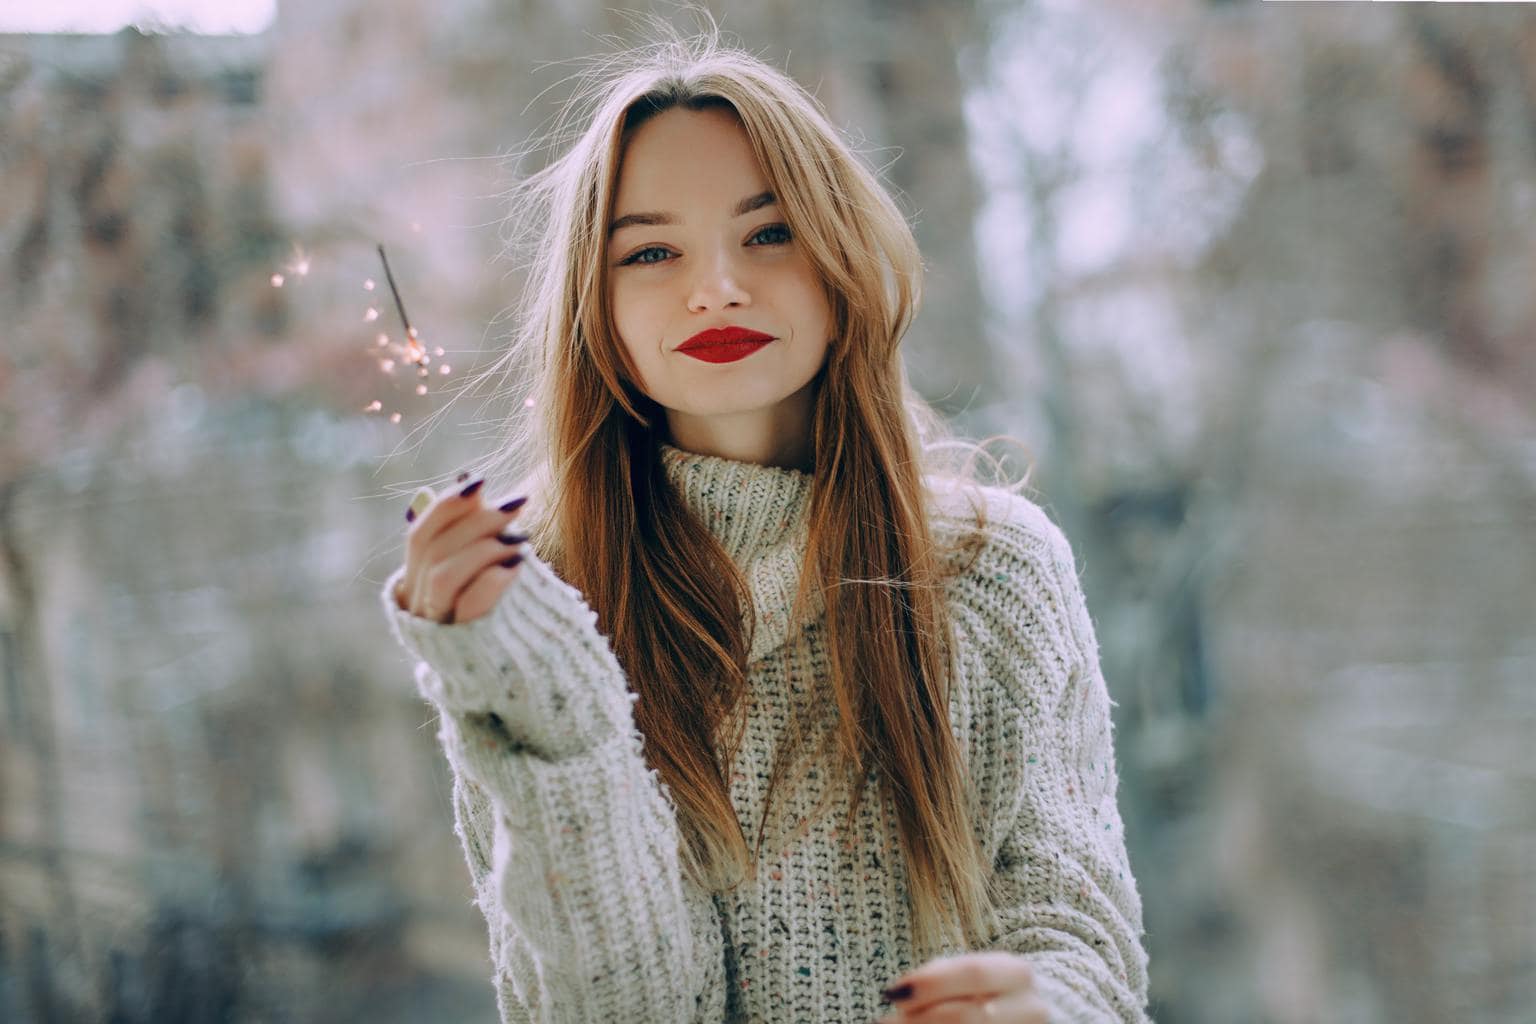 Girl holding a sparkler and wearing red lipstick